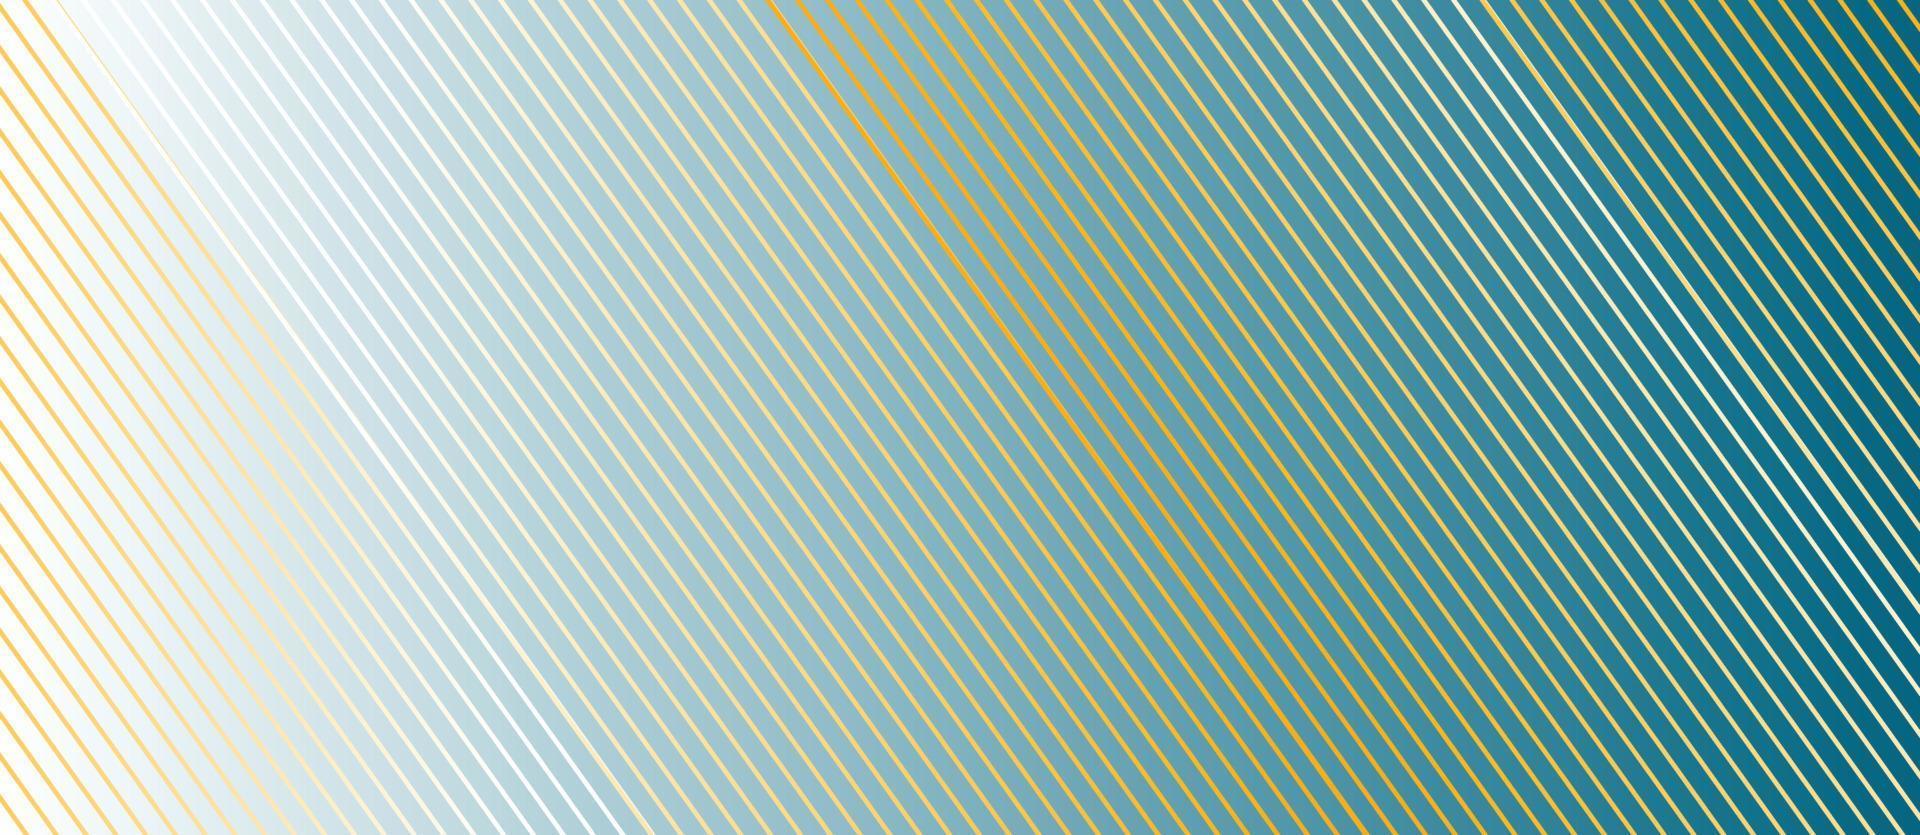 Line stripe pattern on white Wavy background. abstract modern background futuristic graphic energy sound waves technology concept design vector